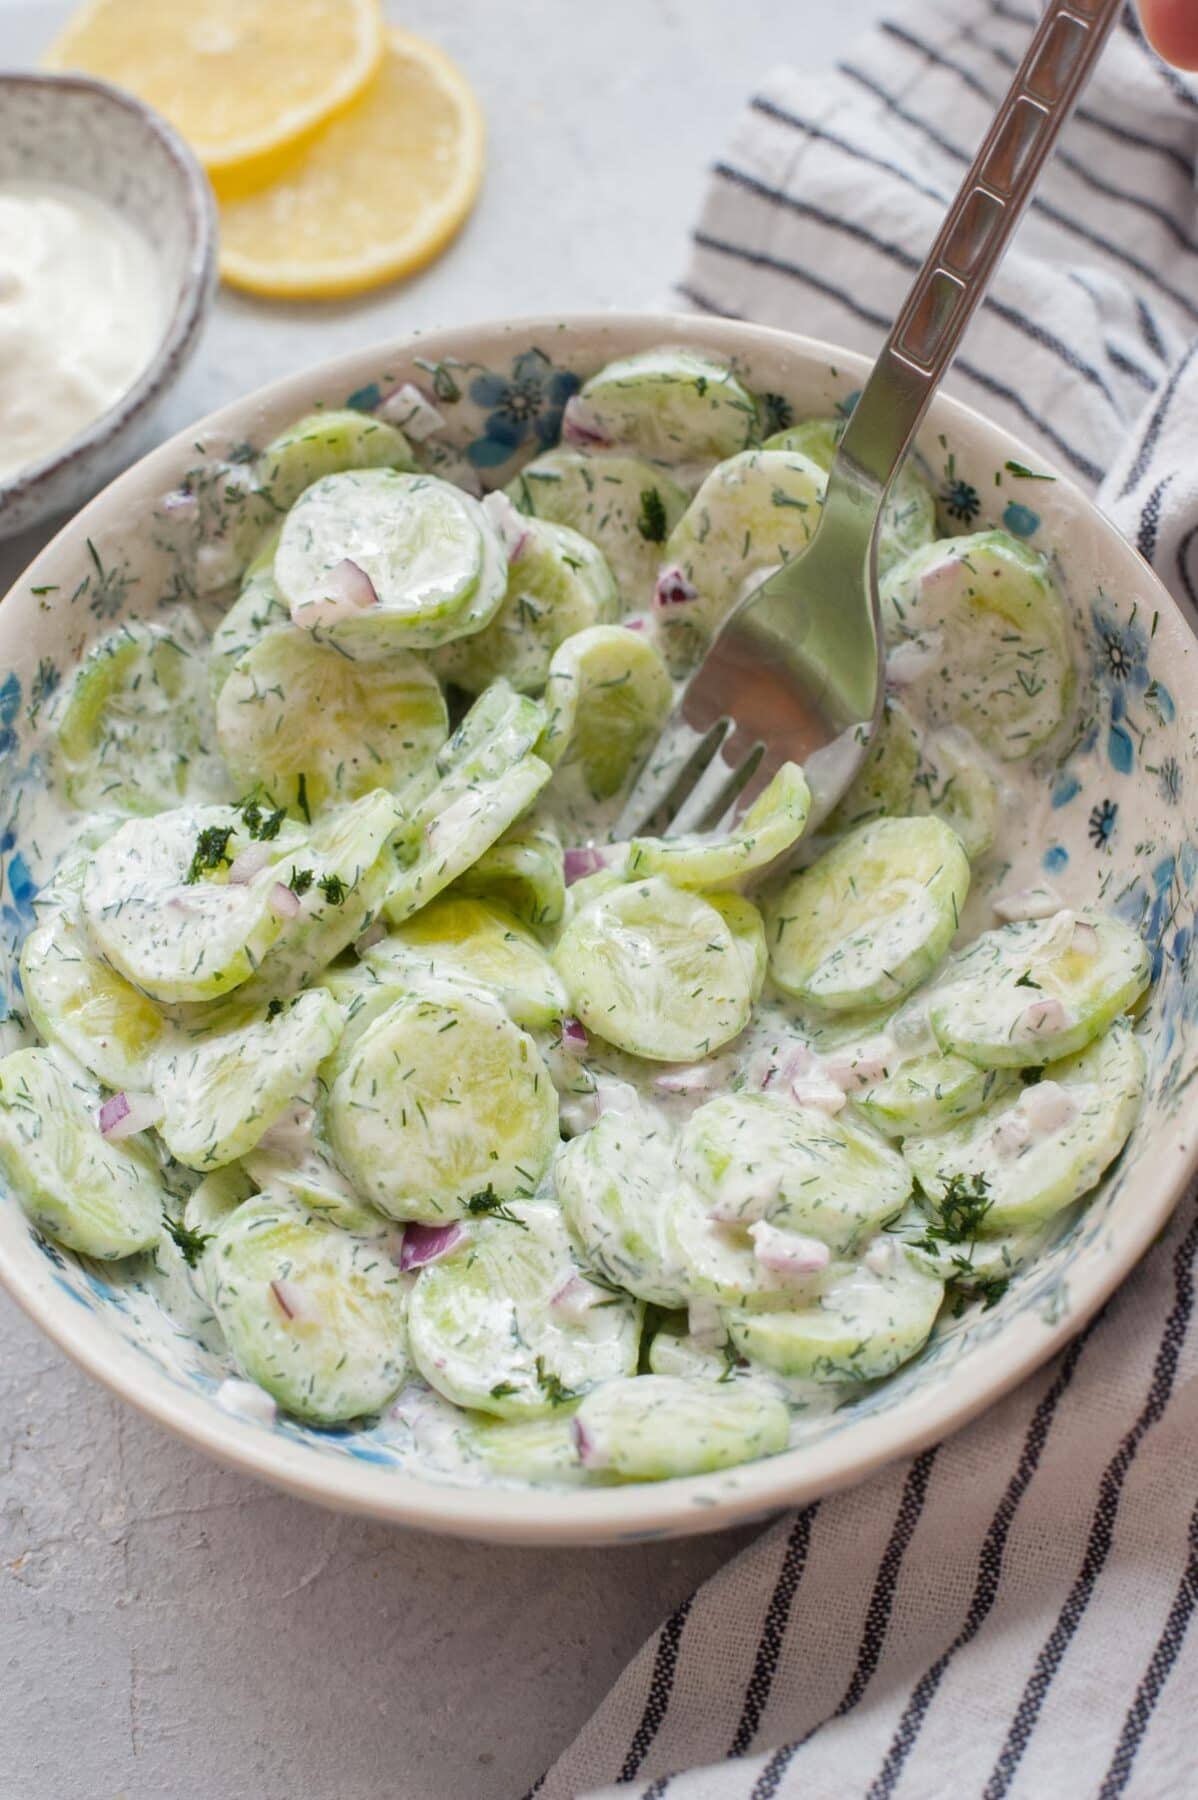 Mizeria (Polish cucumber salad) in a white bowl is being stuck on a fork.